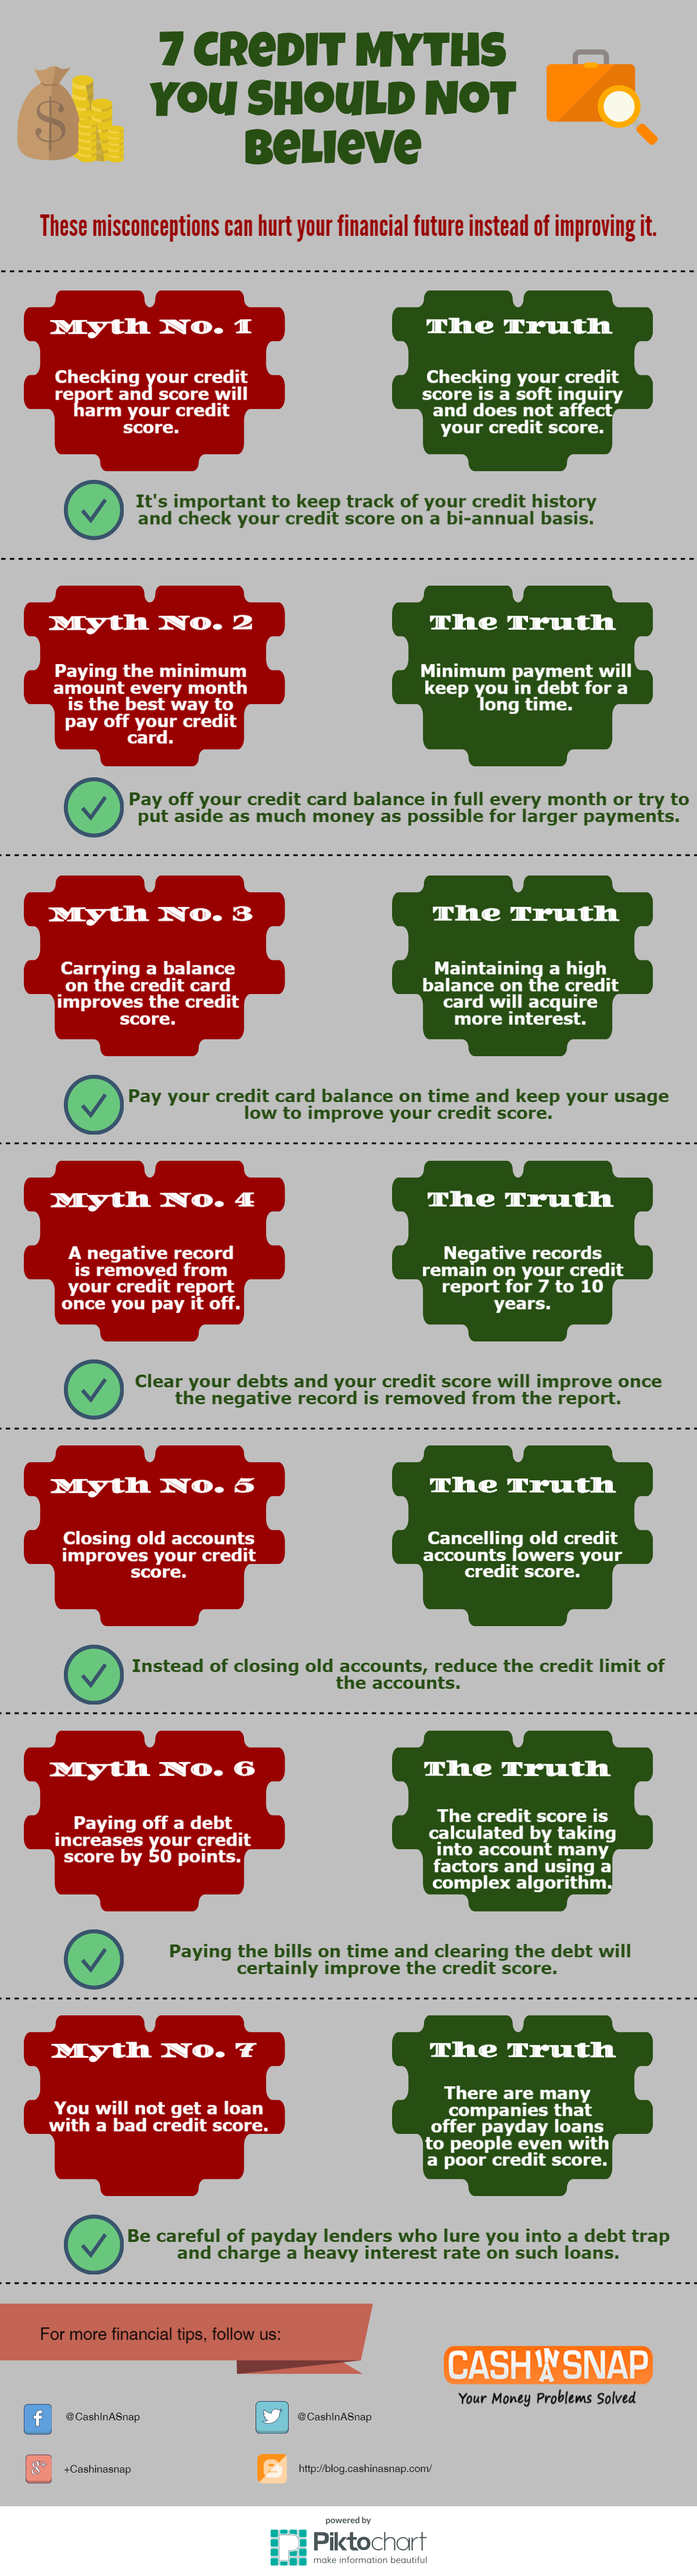 Infographic on 7 Credit Myths You Should Not Believe